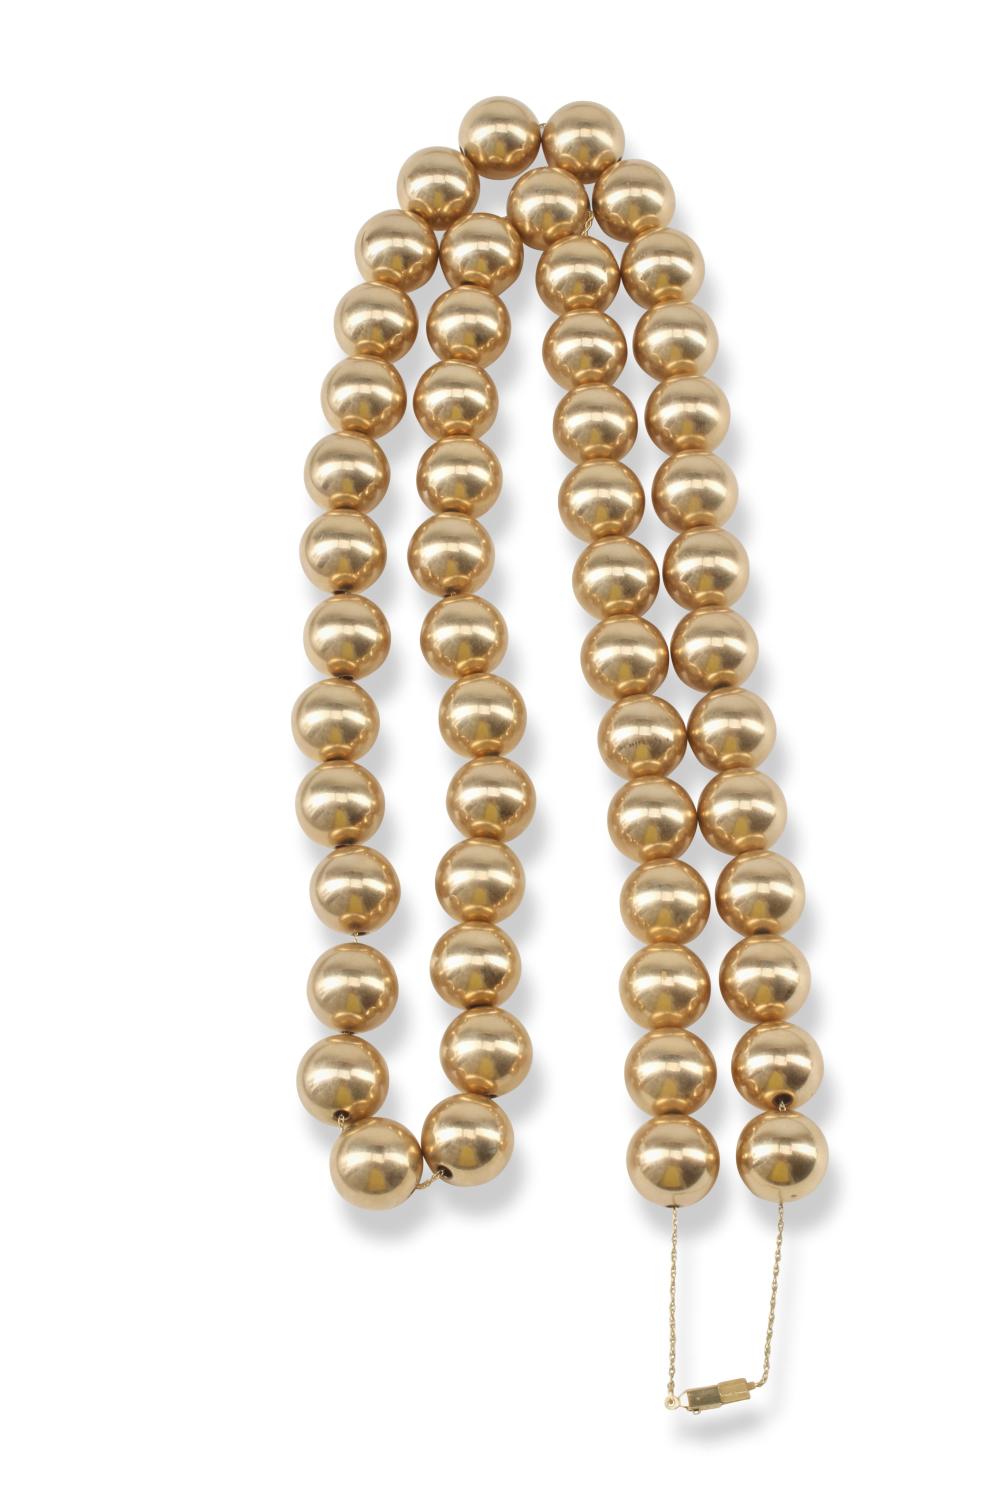 A GOLD BEAD NECKLACEA gold bead